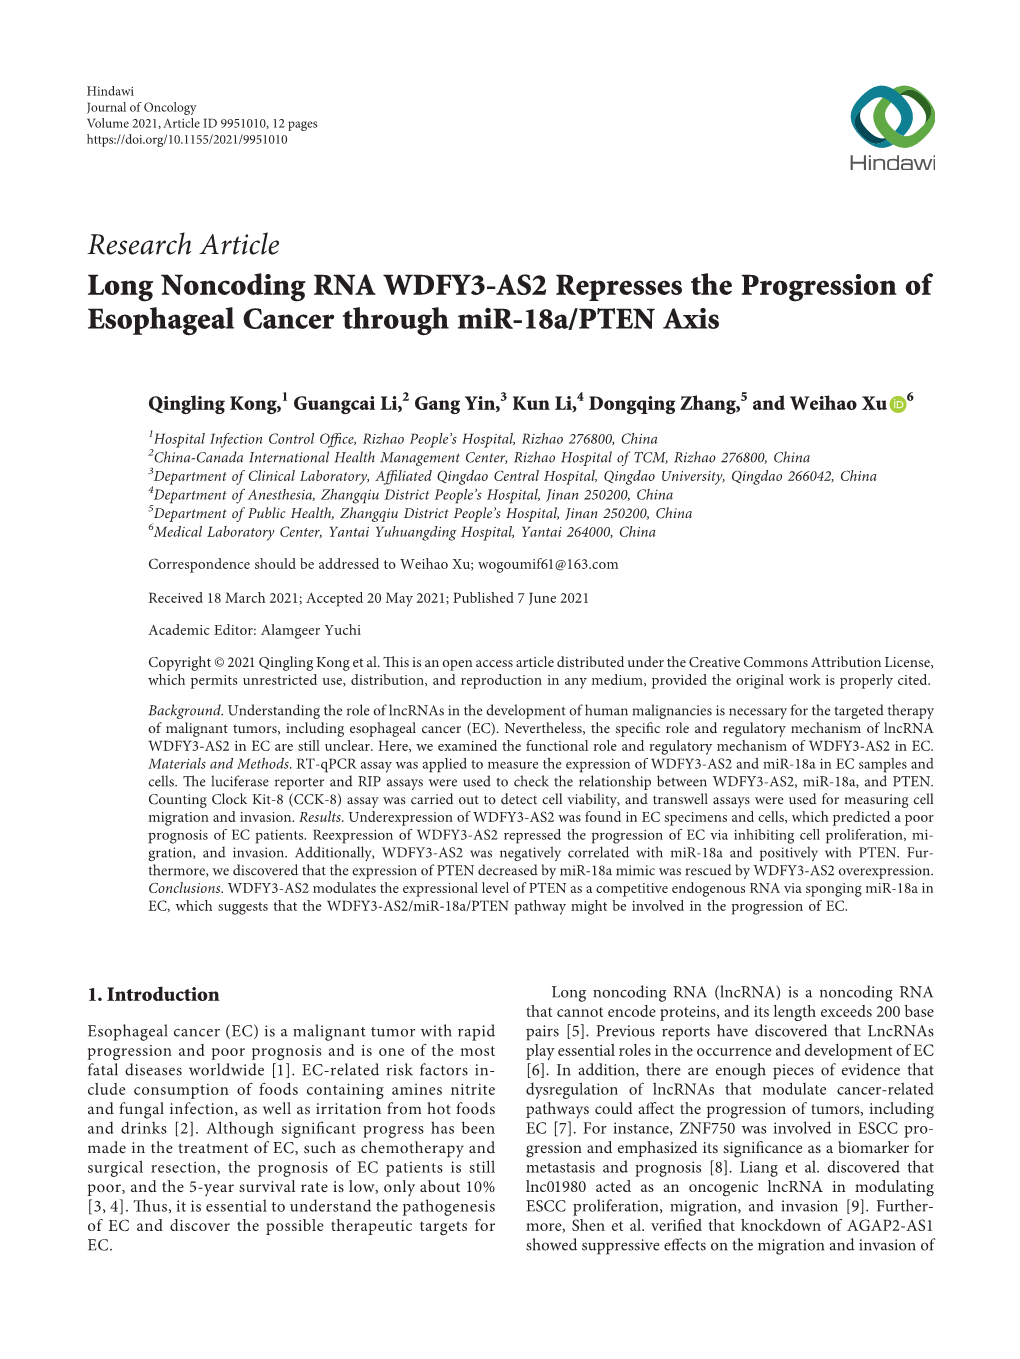 Long Noncoding RNA WDFY3-AS2 Represses the Progression of Esophageal Cancer Through Mir-18A/PTEN Axis